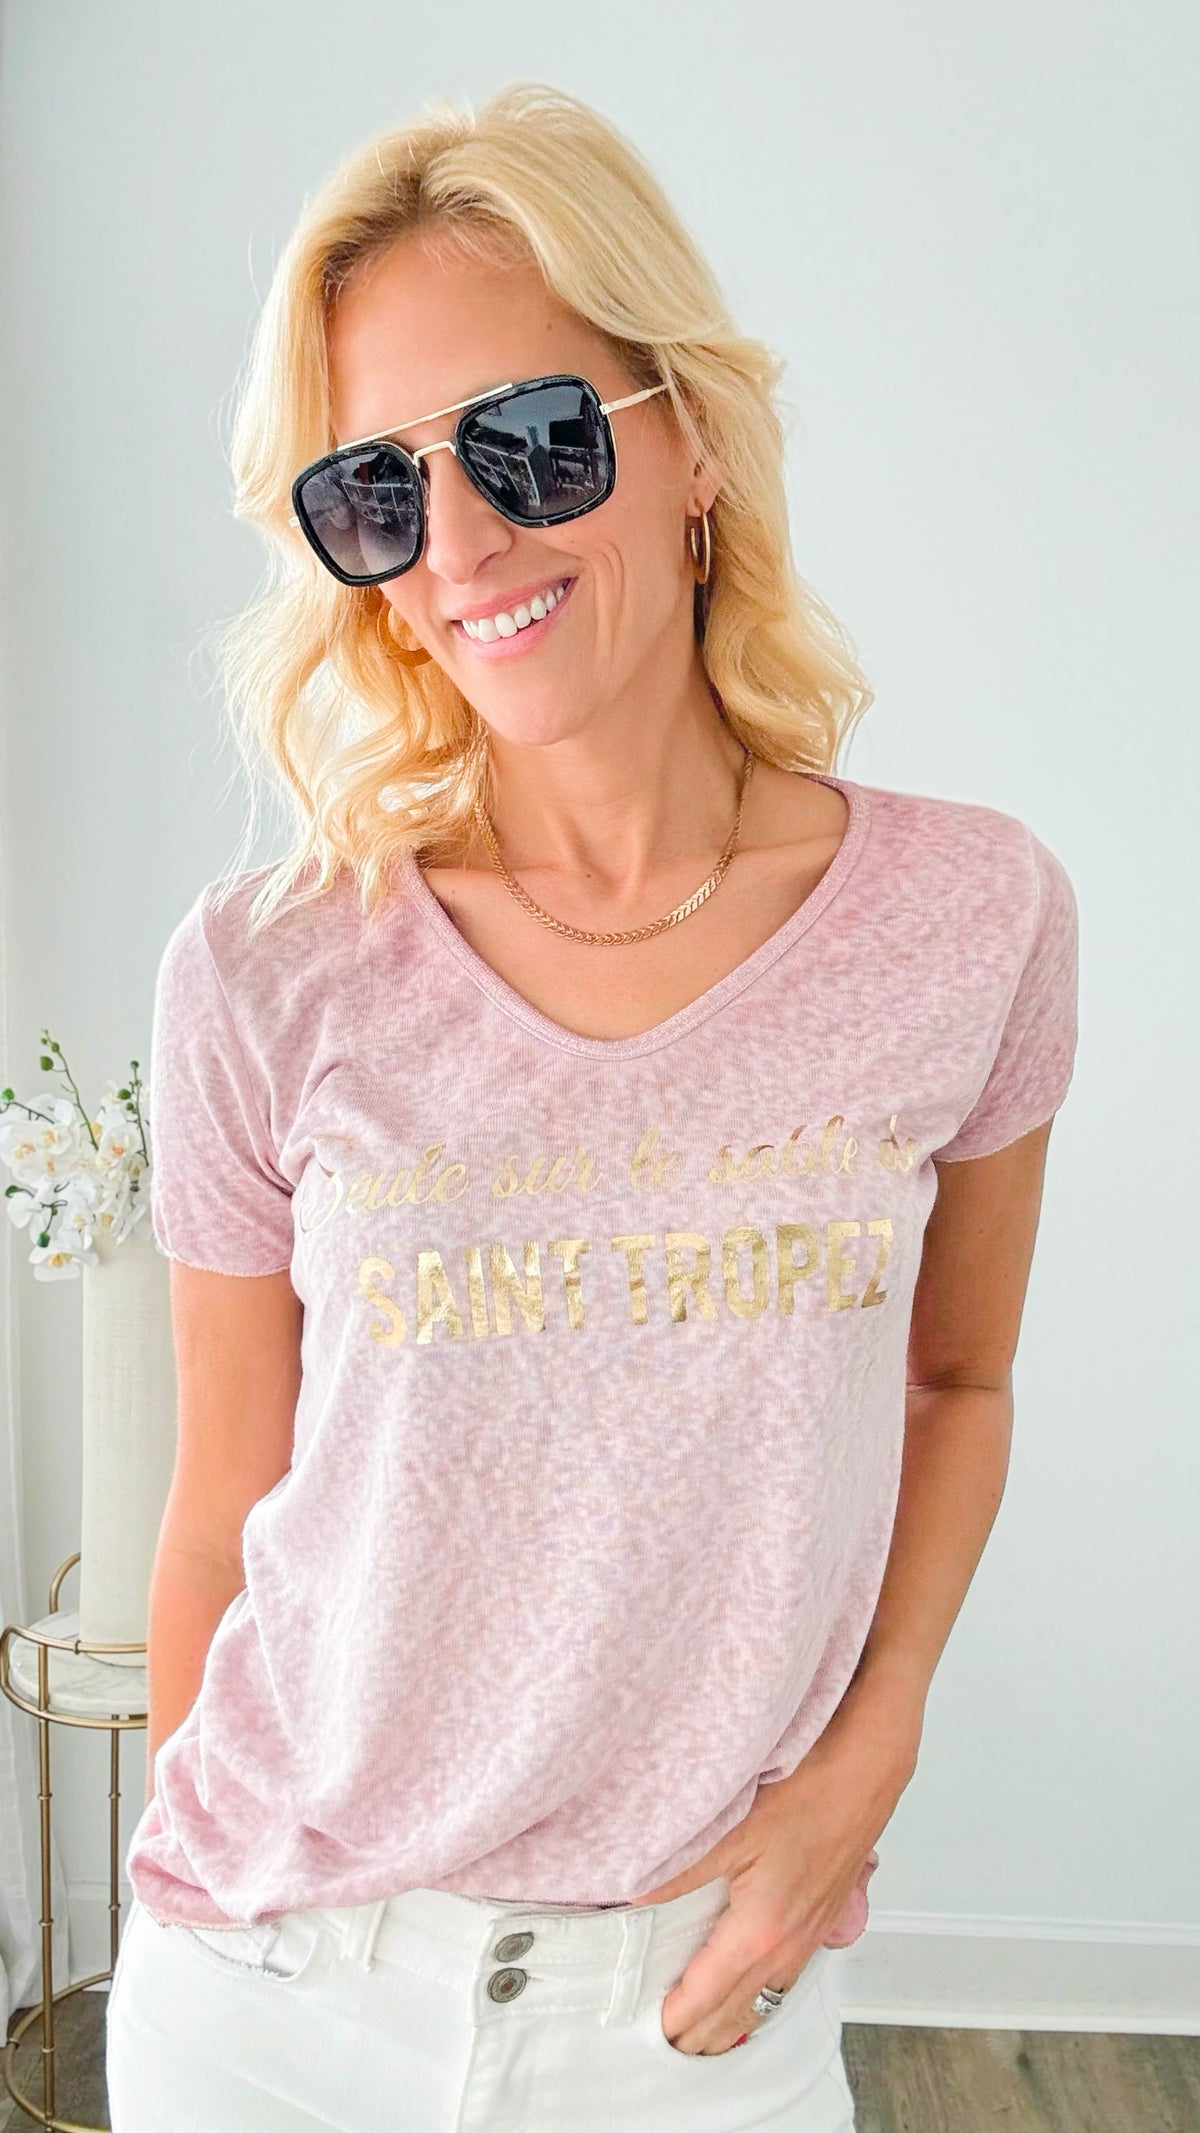 Sands Of St Tropez Italian Top - Blush-110 Short Sleeve Tops-moda italia-Coastal Bloom Boutique, find the trendiest versions of the popular styles and looks Located in Indialantic, FL